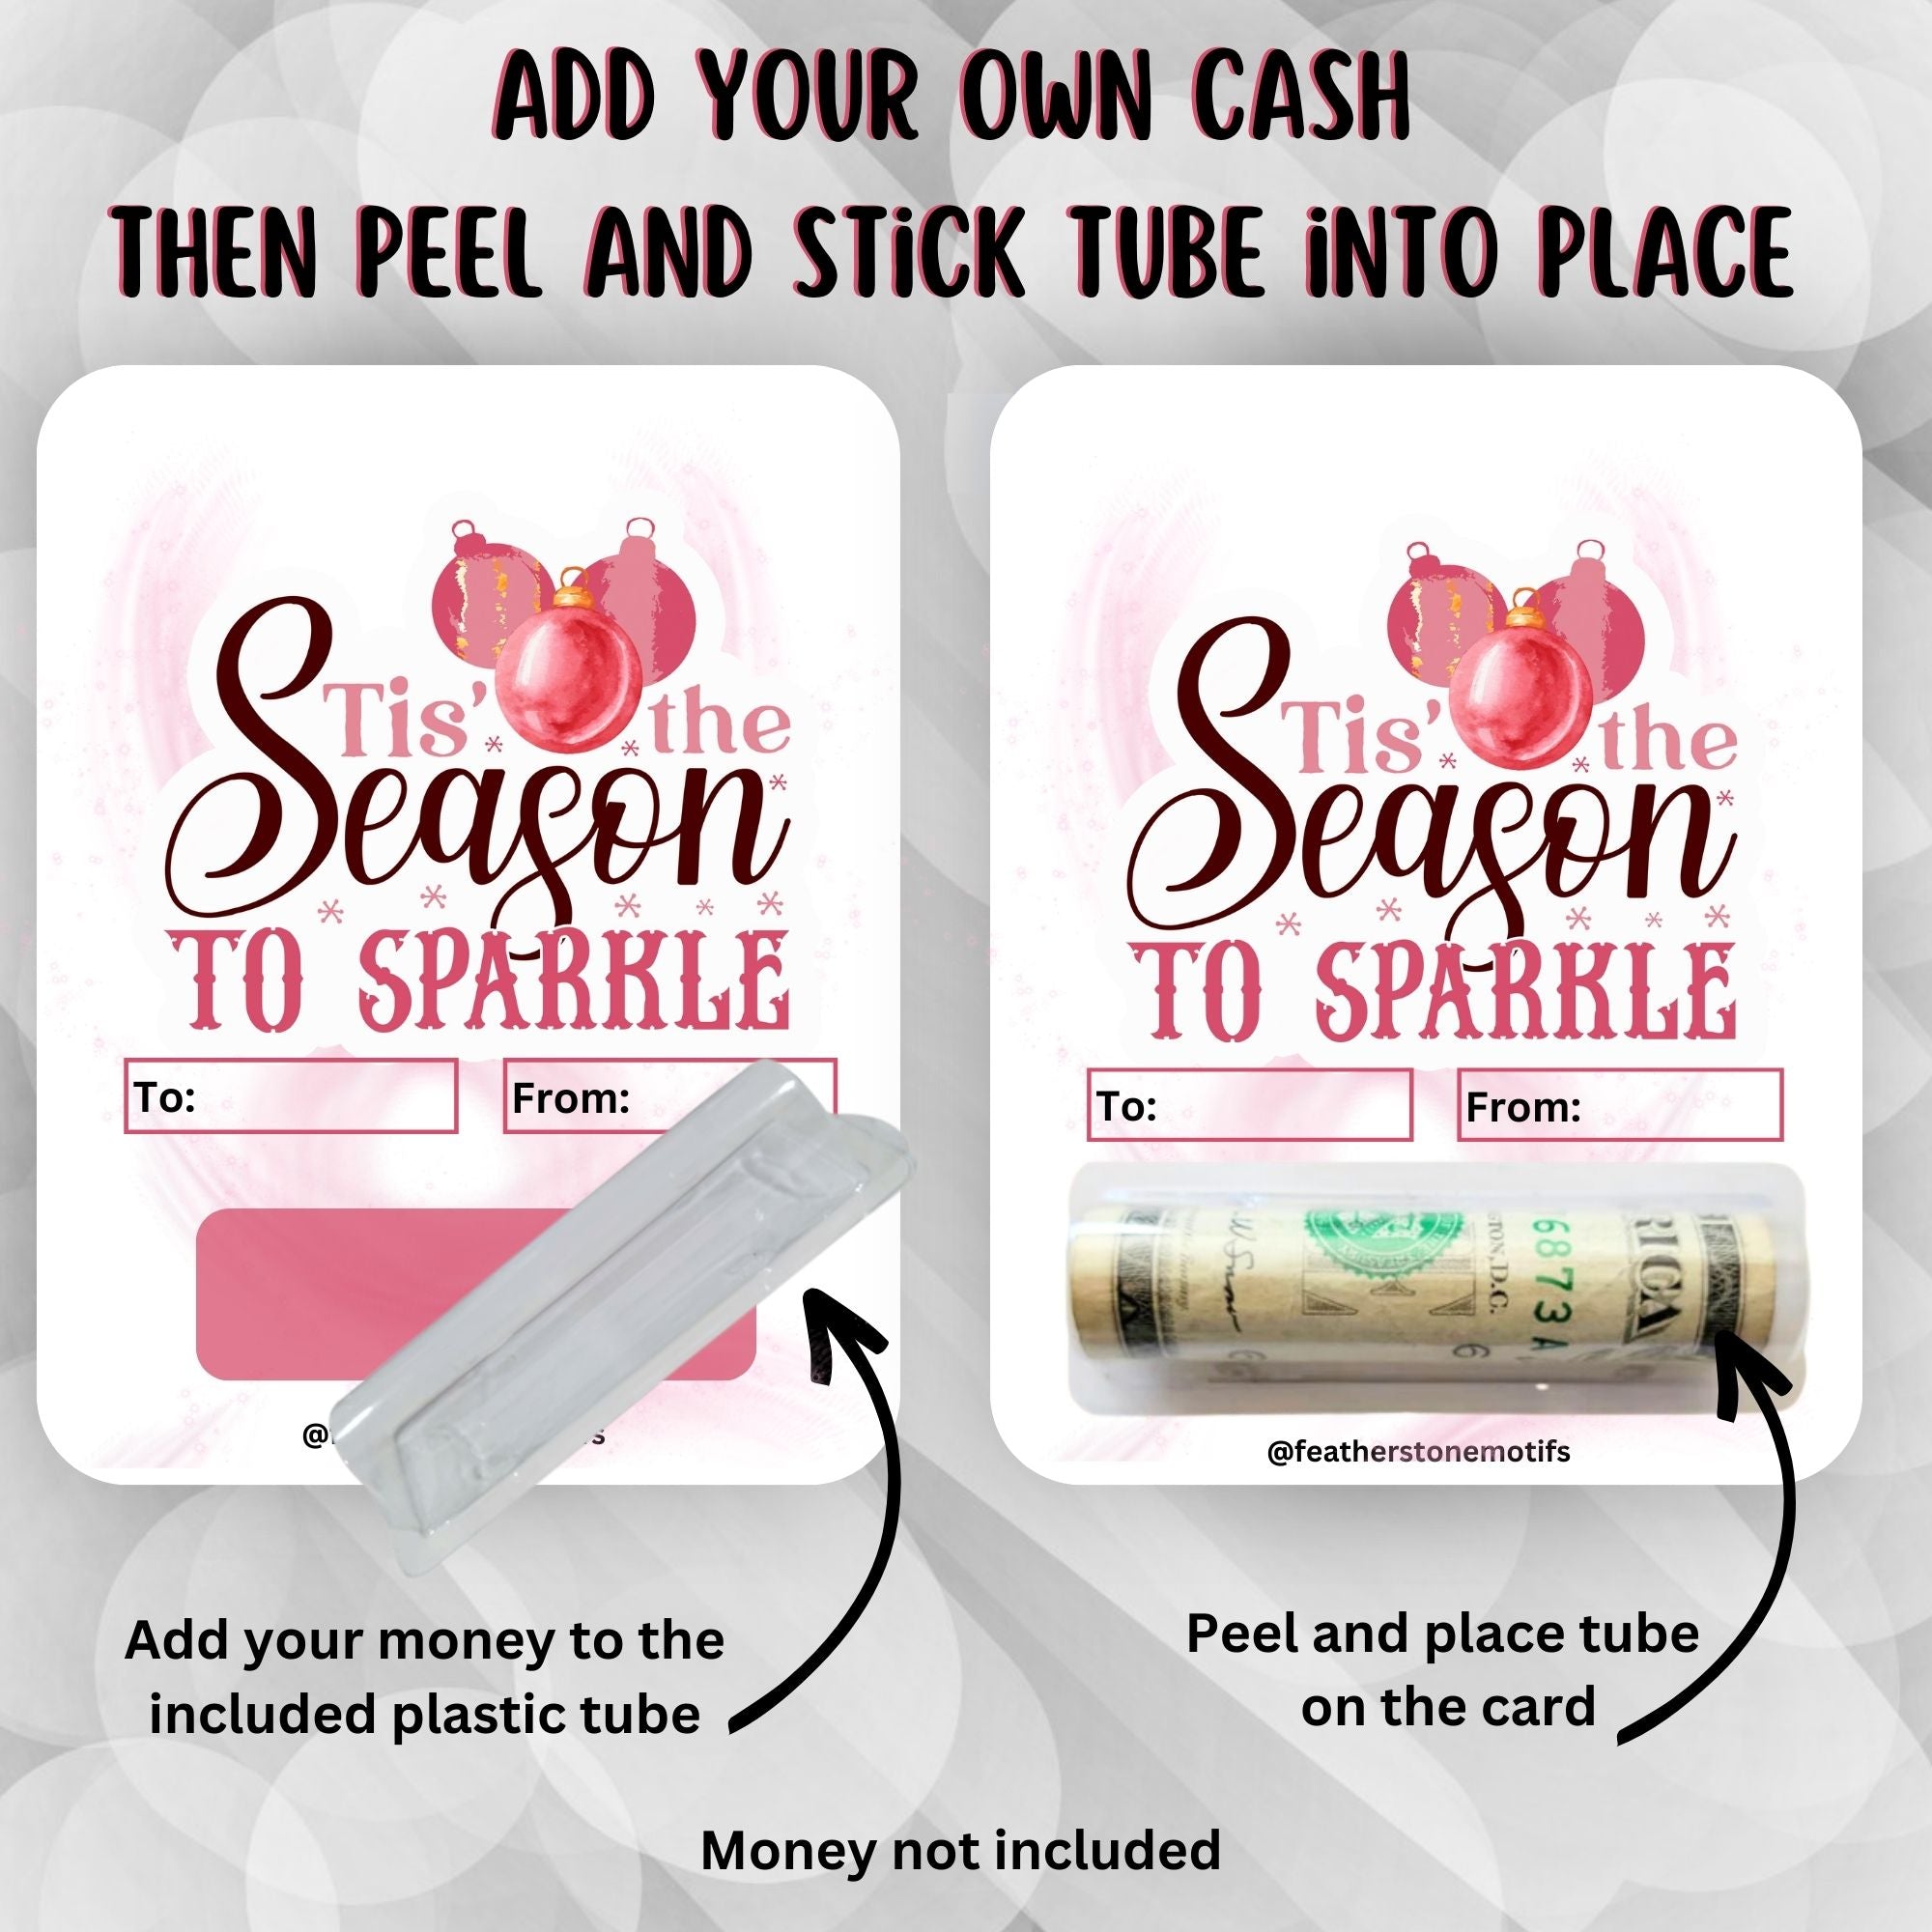 This image shows how to attach the money tube Season to Sparkle Money Card